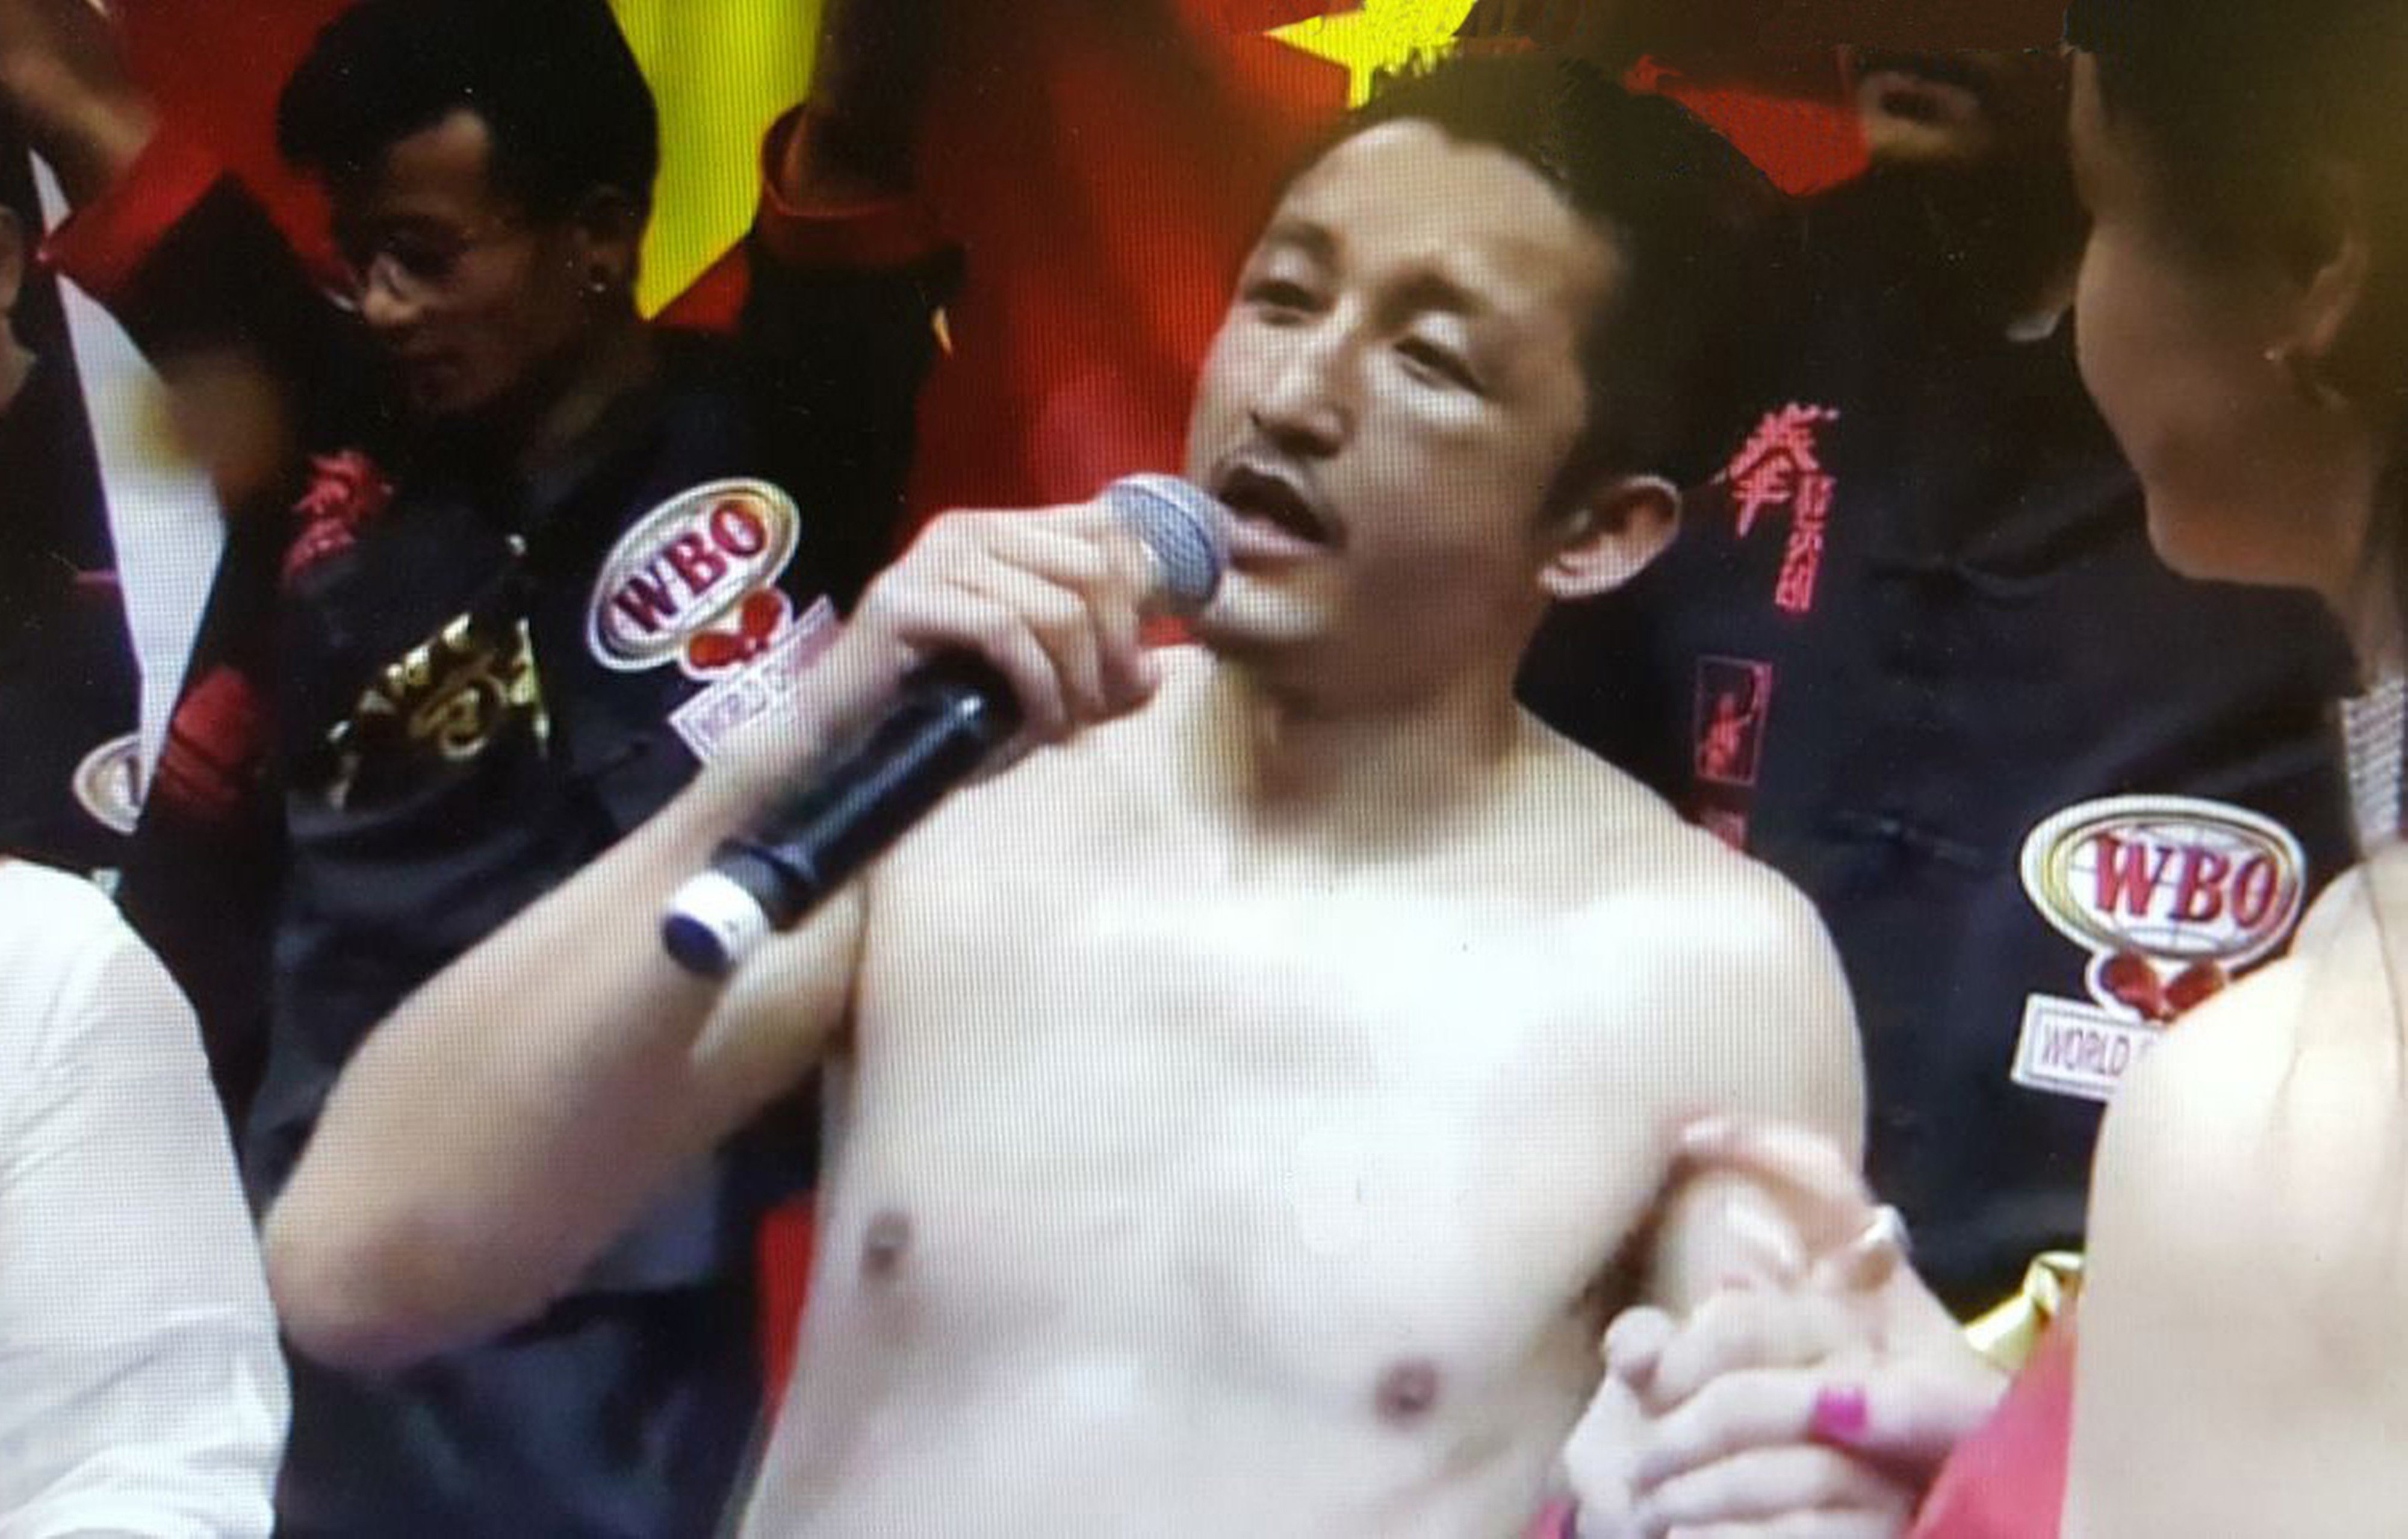 China's Zou Shiming speaks to the audience after losing his WBO world title fight in Shanghai. Photo: Handout